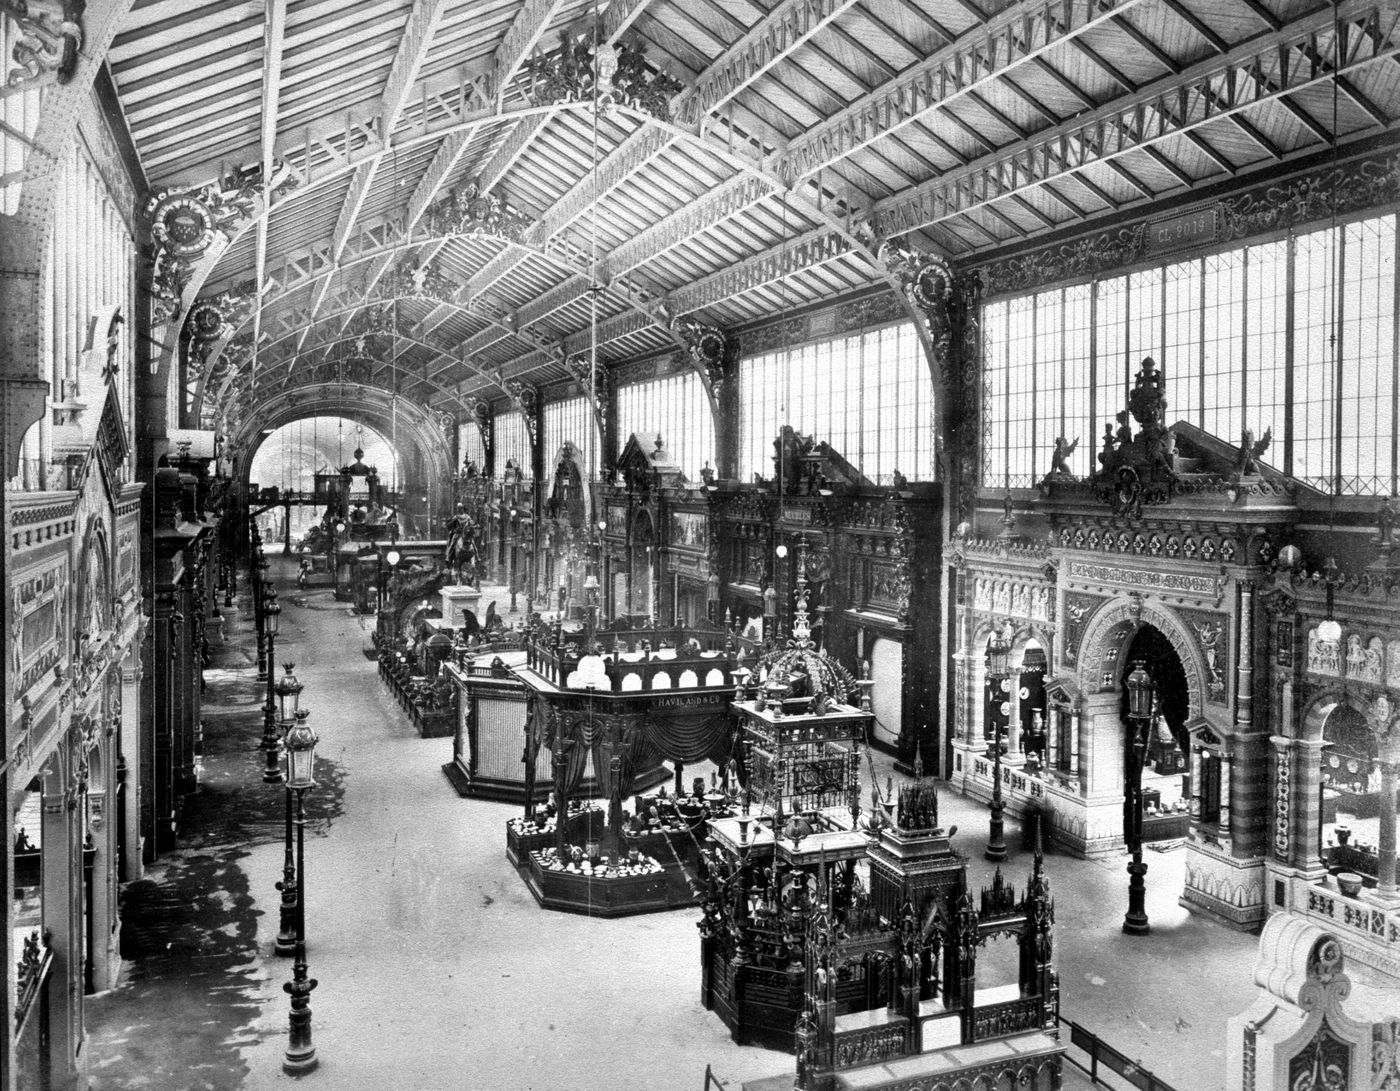 Exposition universelle de 1889 (Paris, France): View of the interior of the Hall of Industry